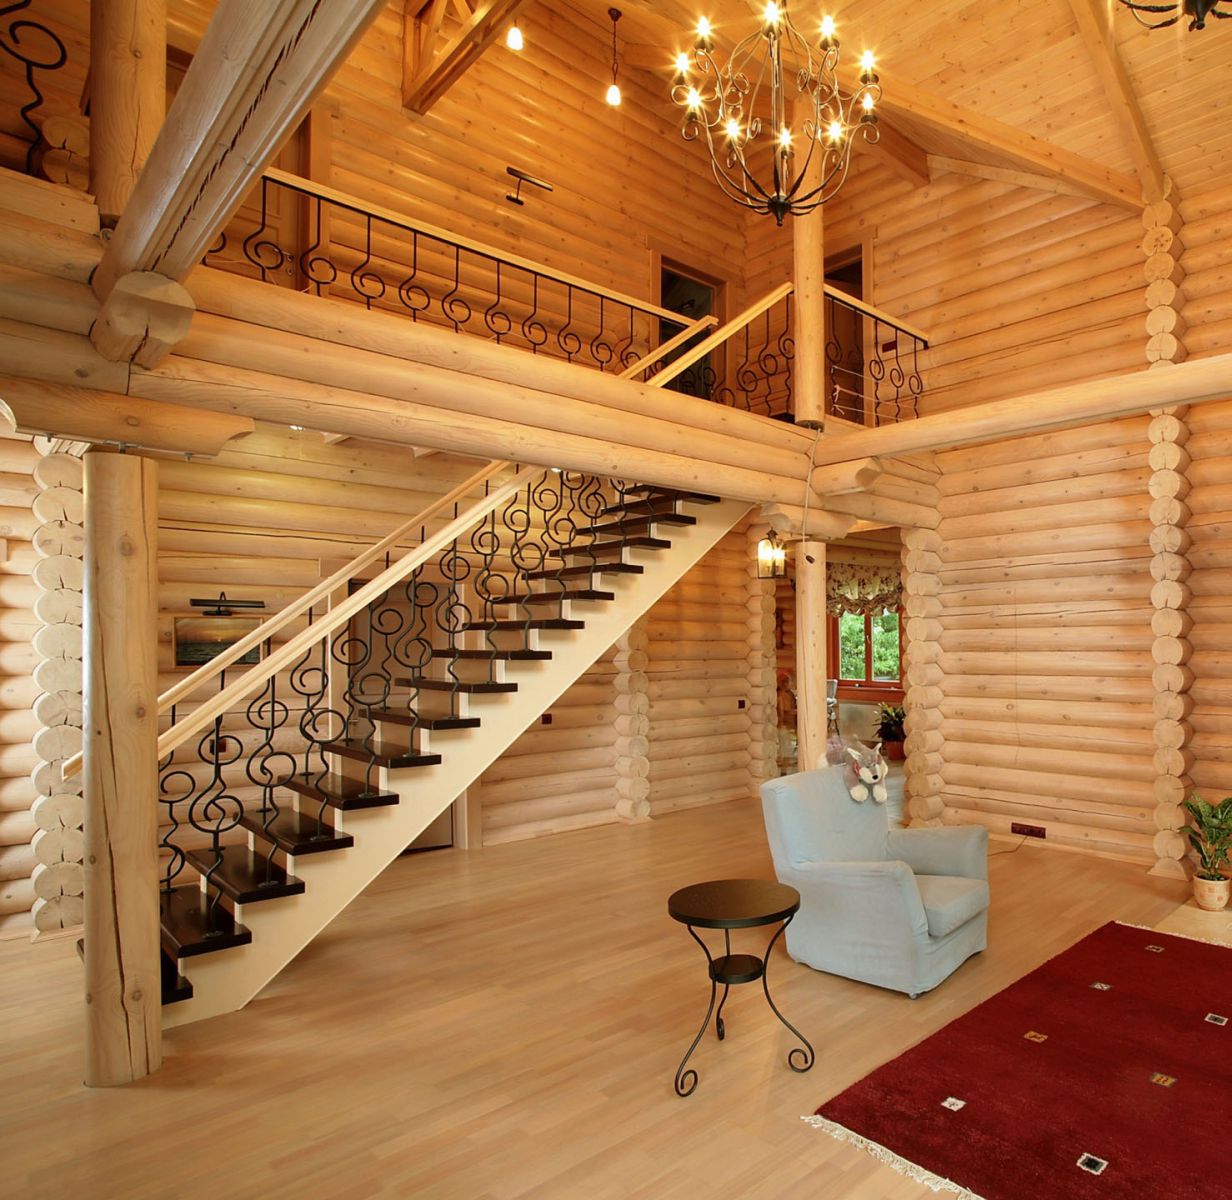 Staircase in the lobby of a log house